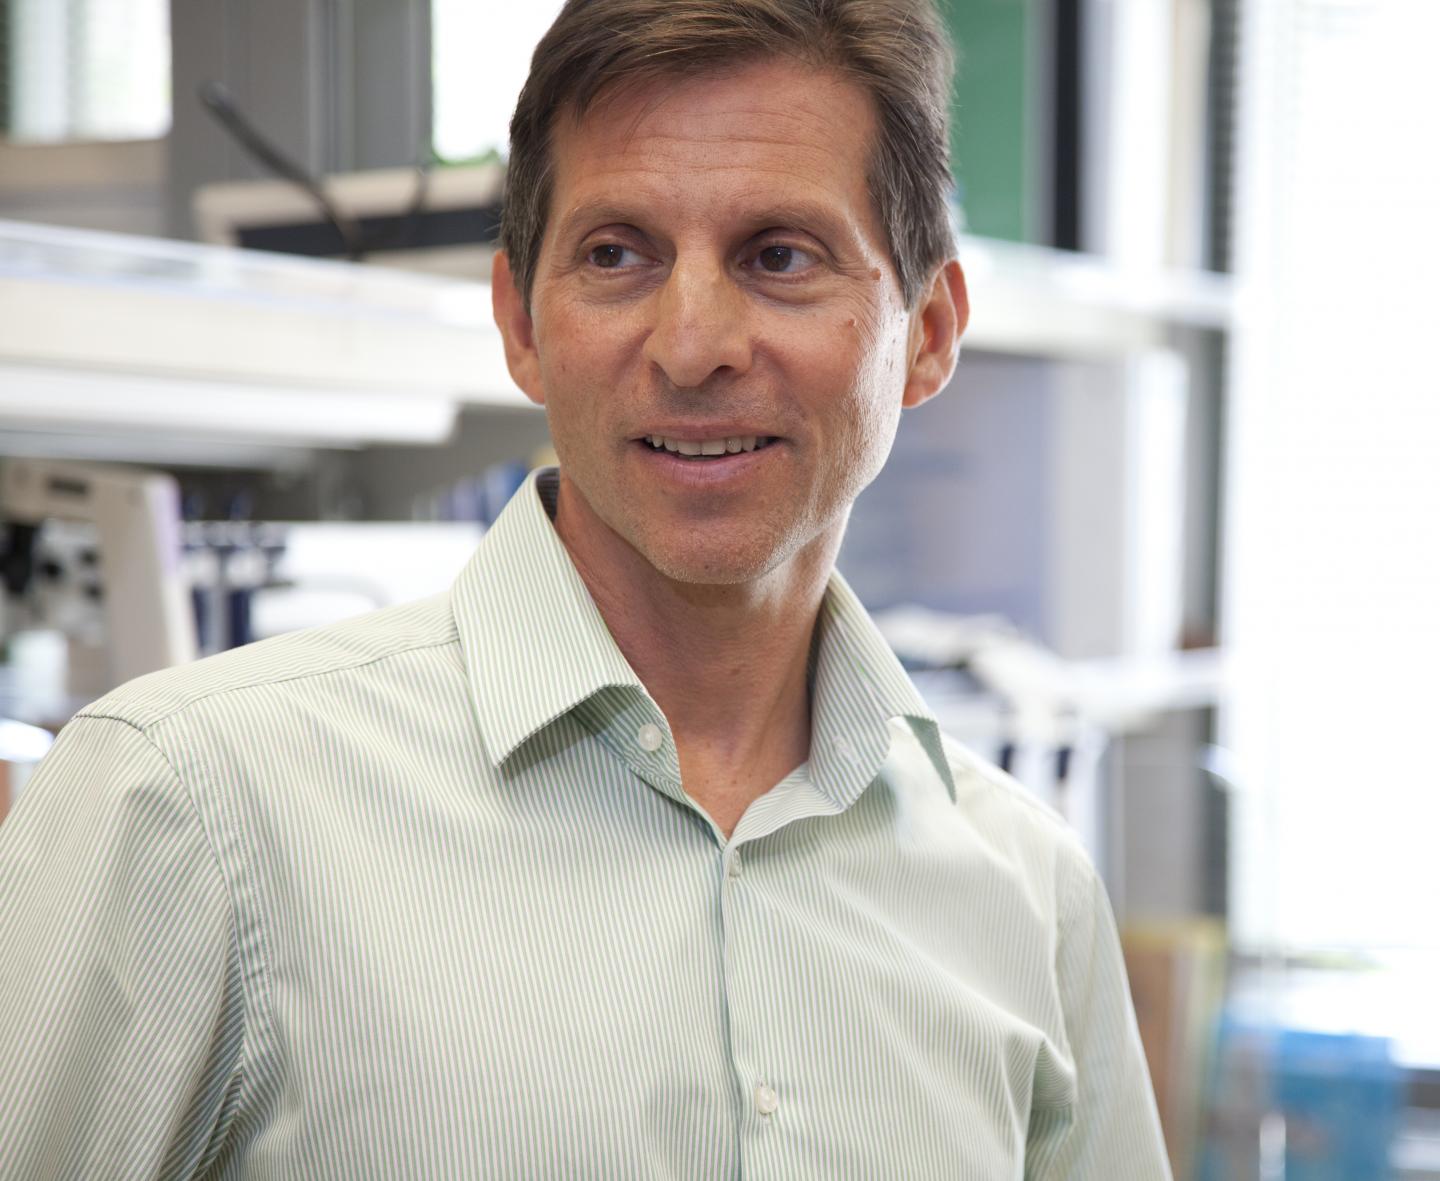 Paul Mischel, Ludwig Institute for Cancer Research